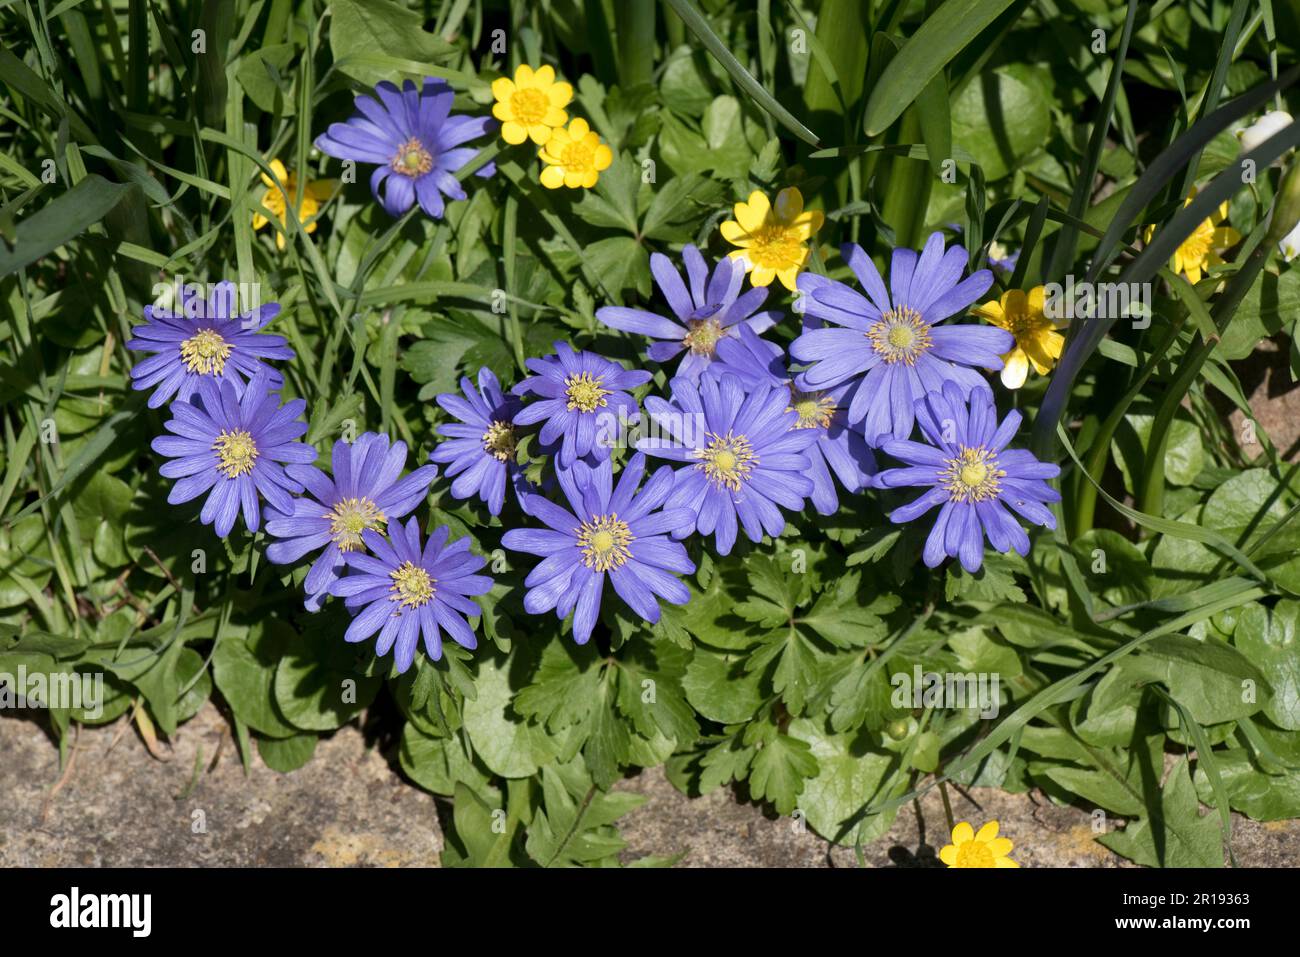 Blue Anemonoides blanda (Anemone blanda) flowers with yellow lesser celandines (Ficaria verna) flowers in a country garden in spring, Berkshire, April Stock Photo